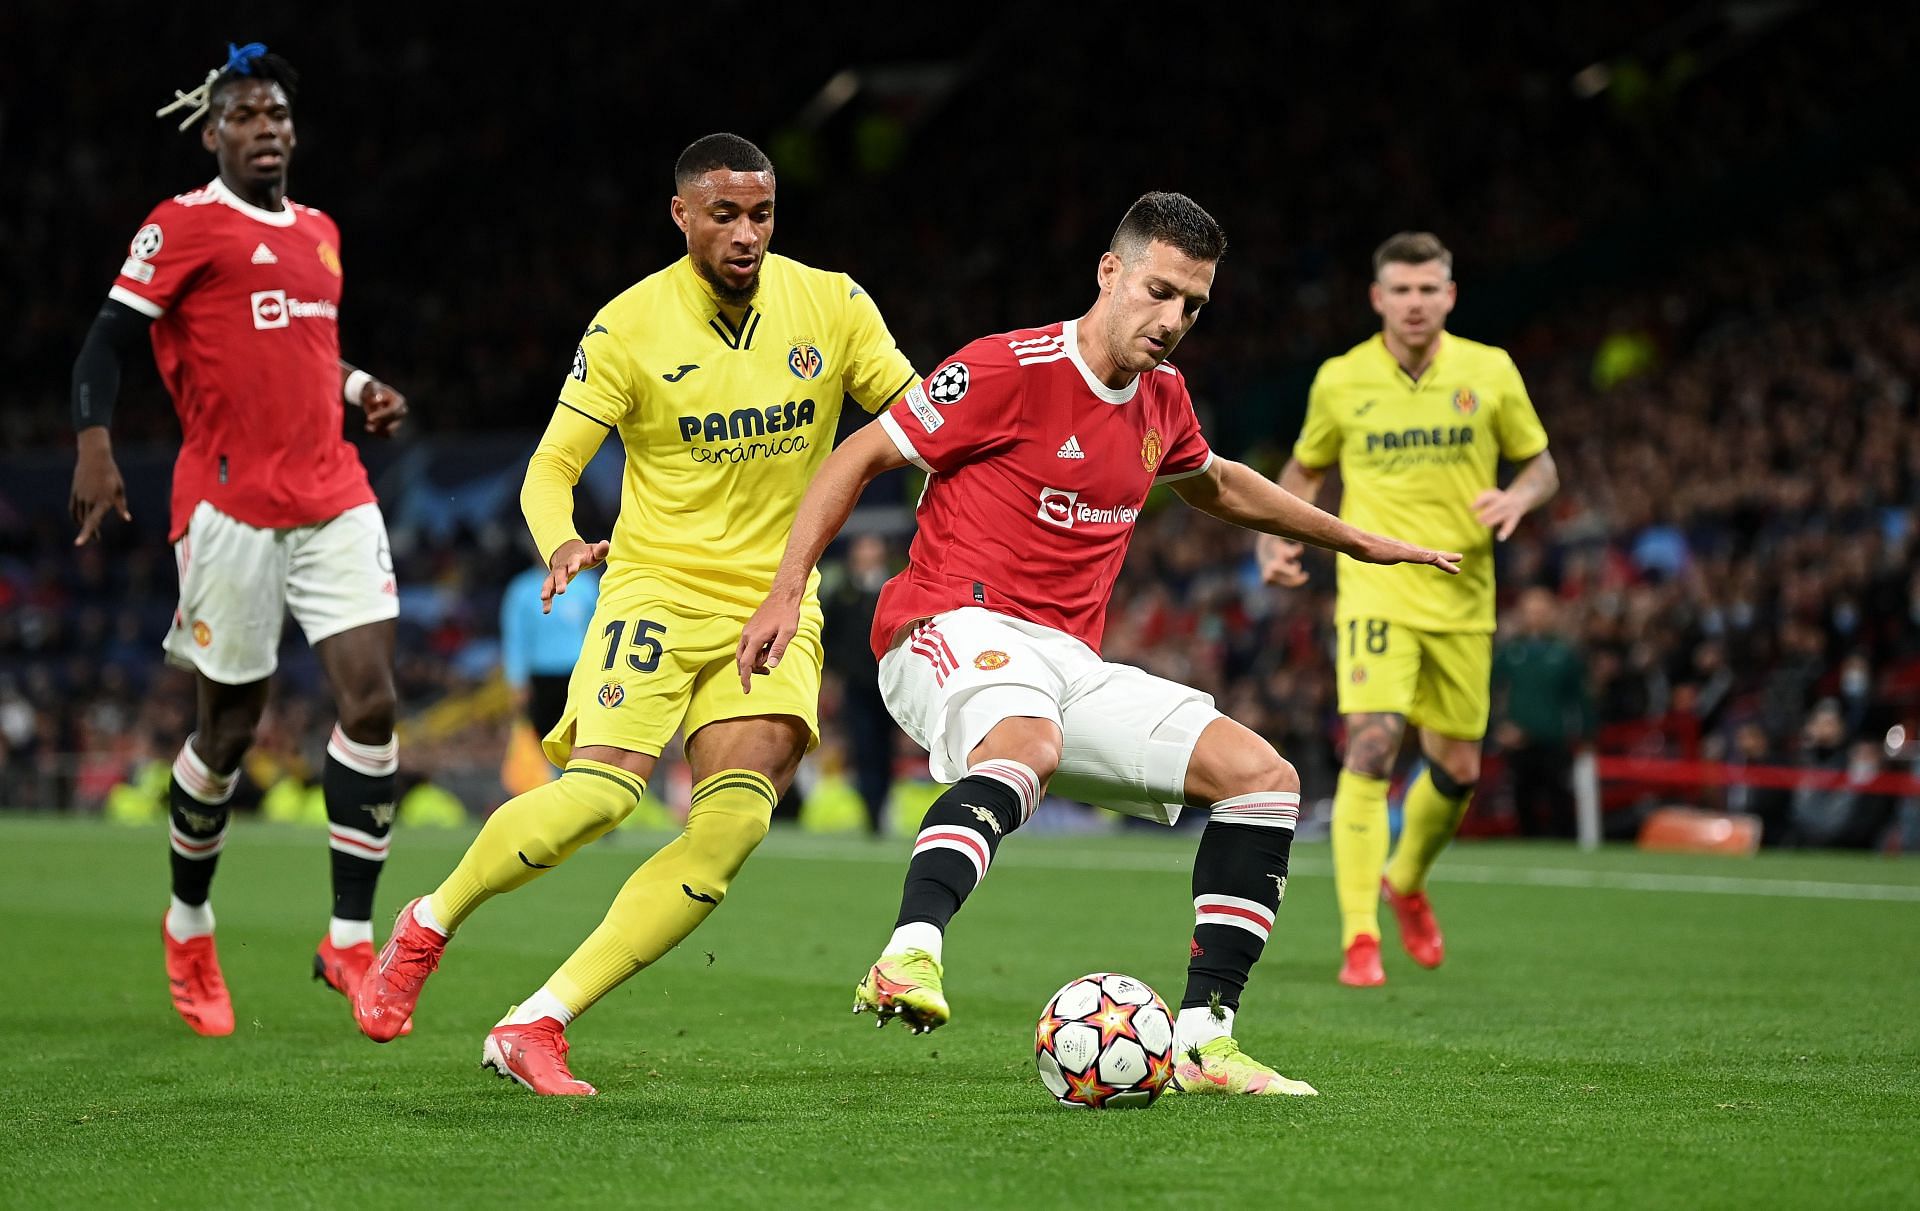 Diogo Dalot in action for Manchester United